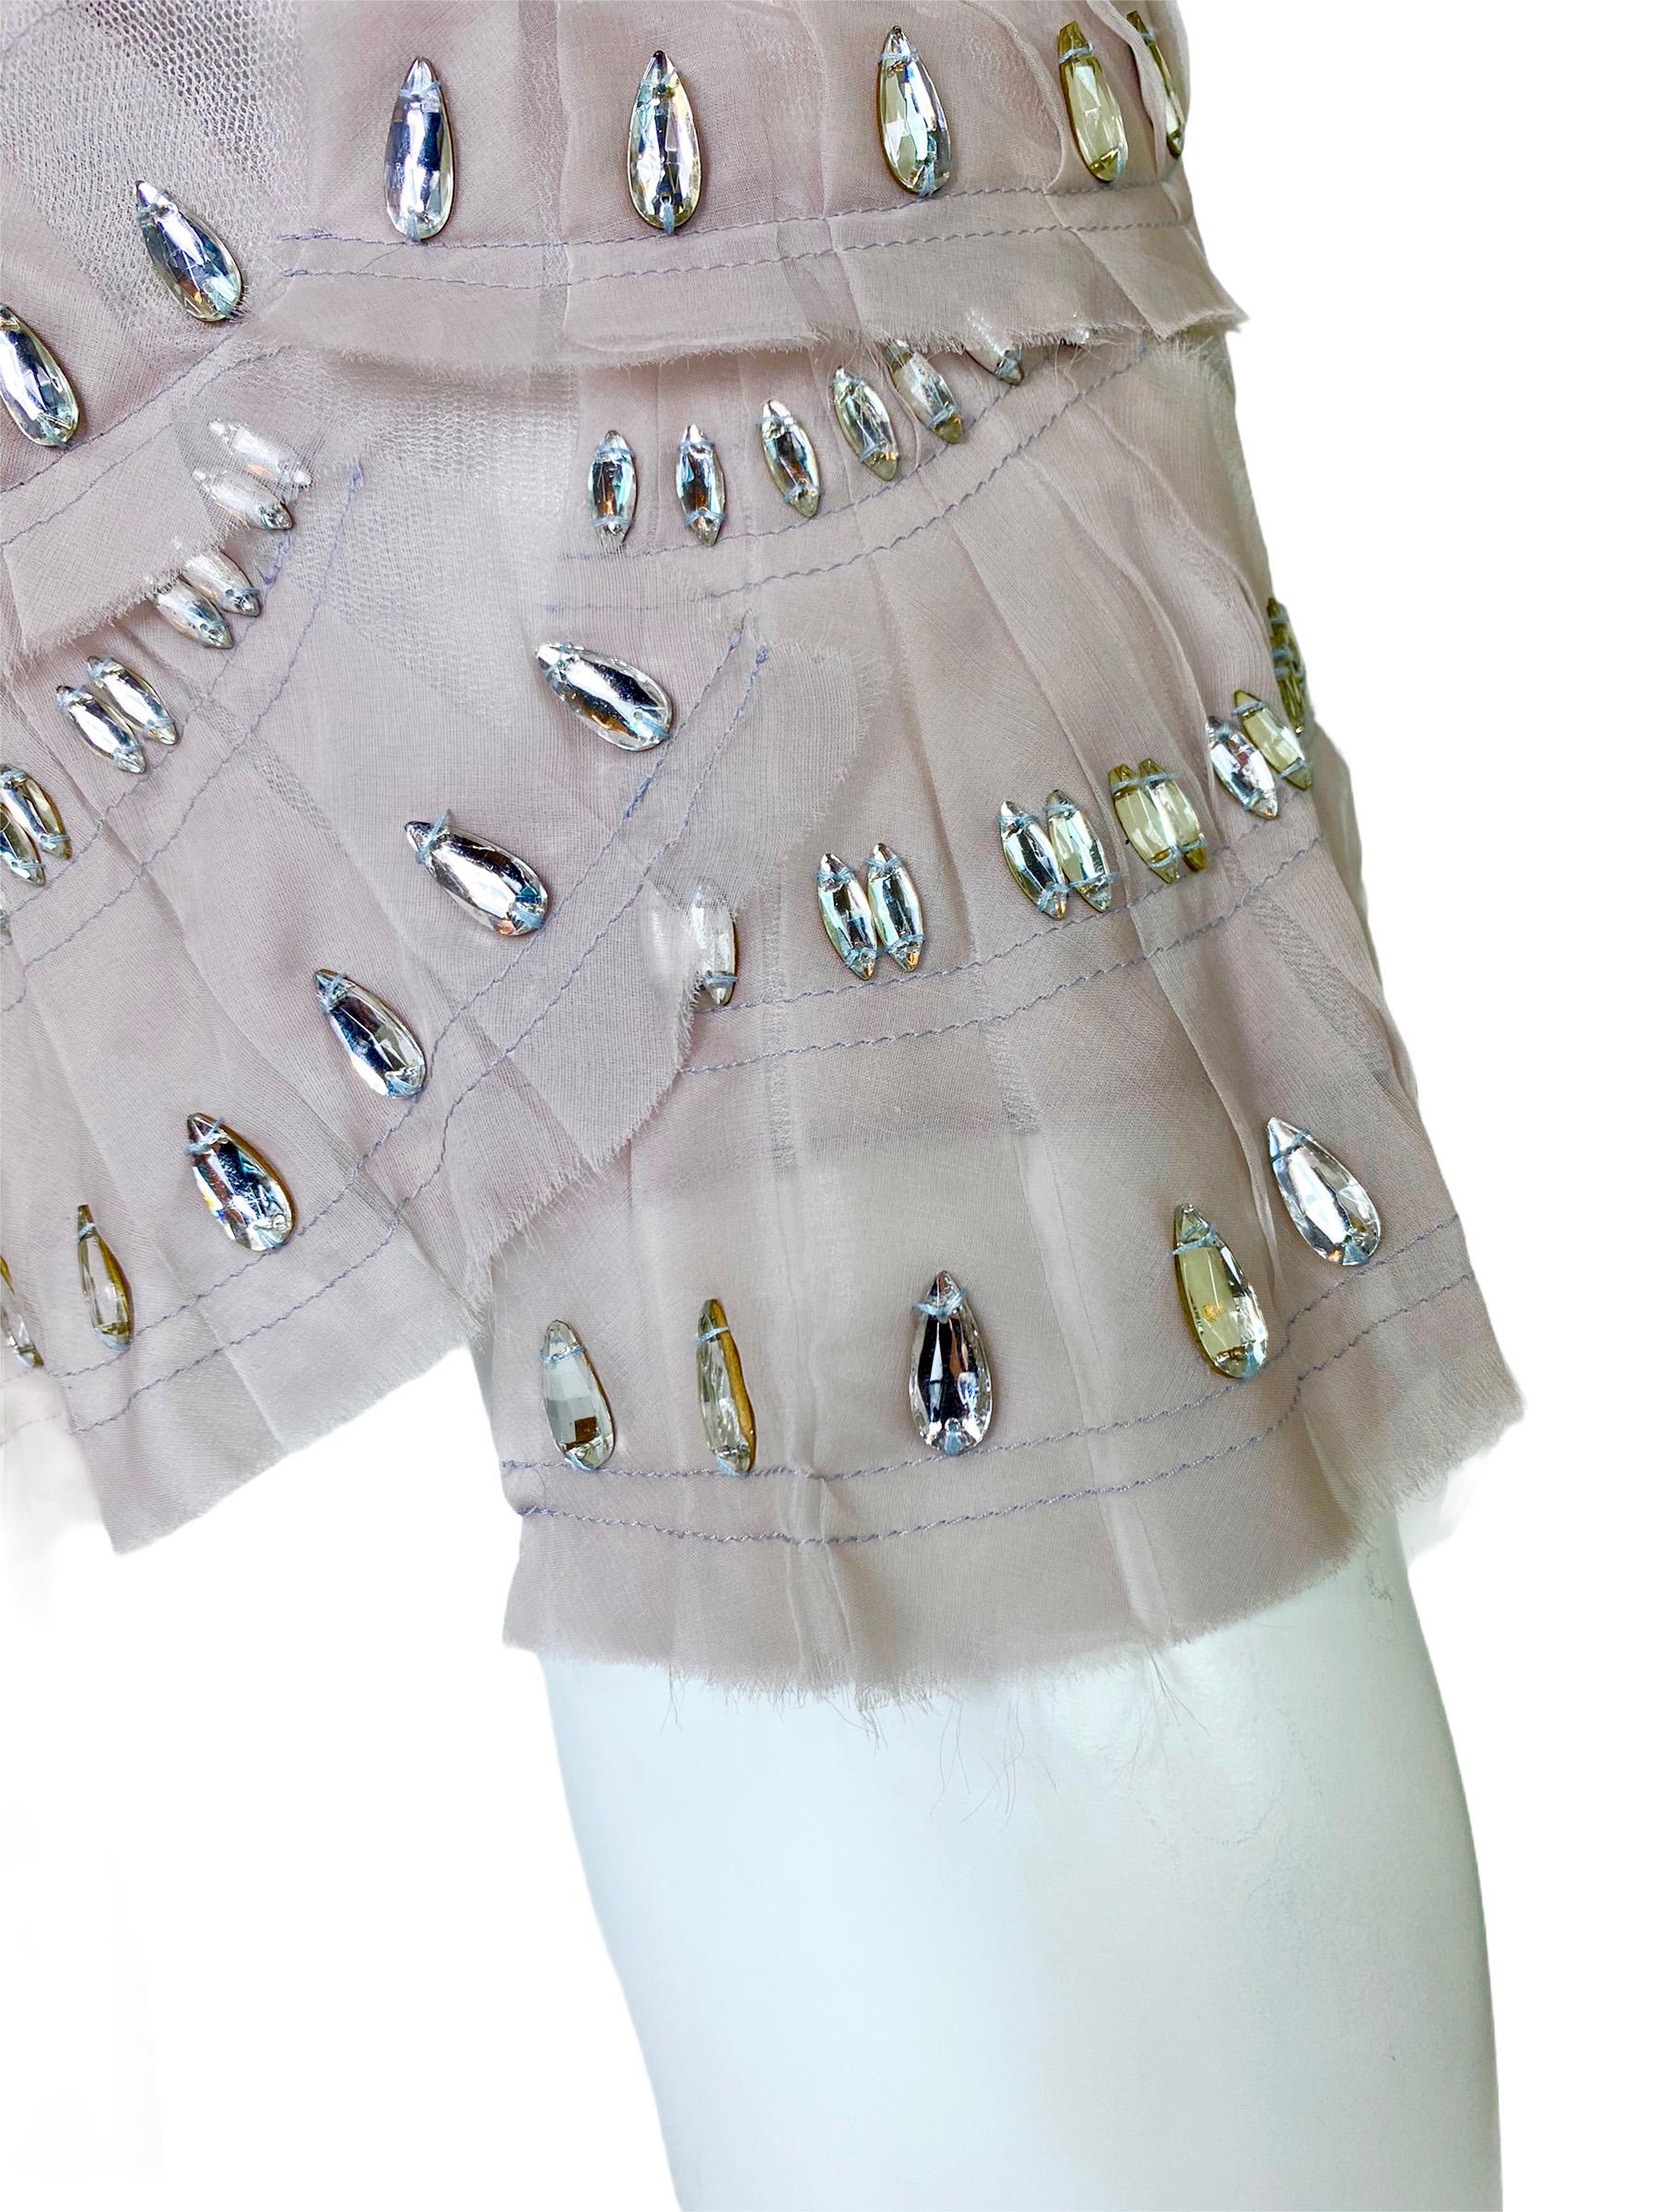 Tom Ford for Gucci Crystal Embellished Skirt, S/S 2004  1